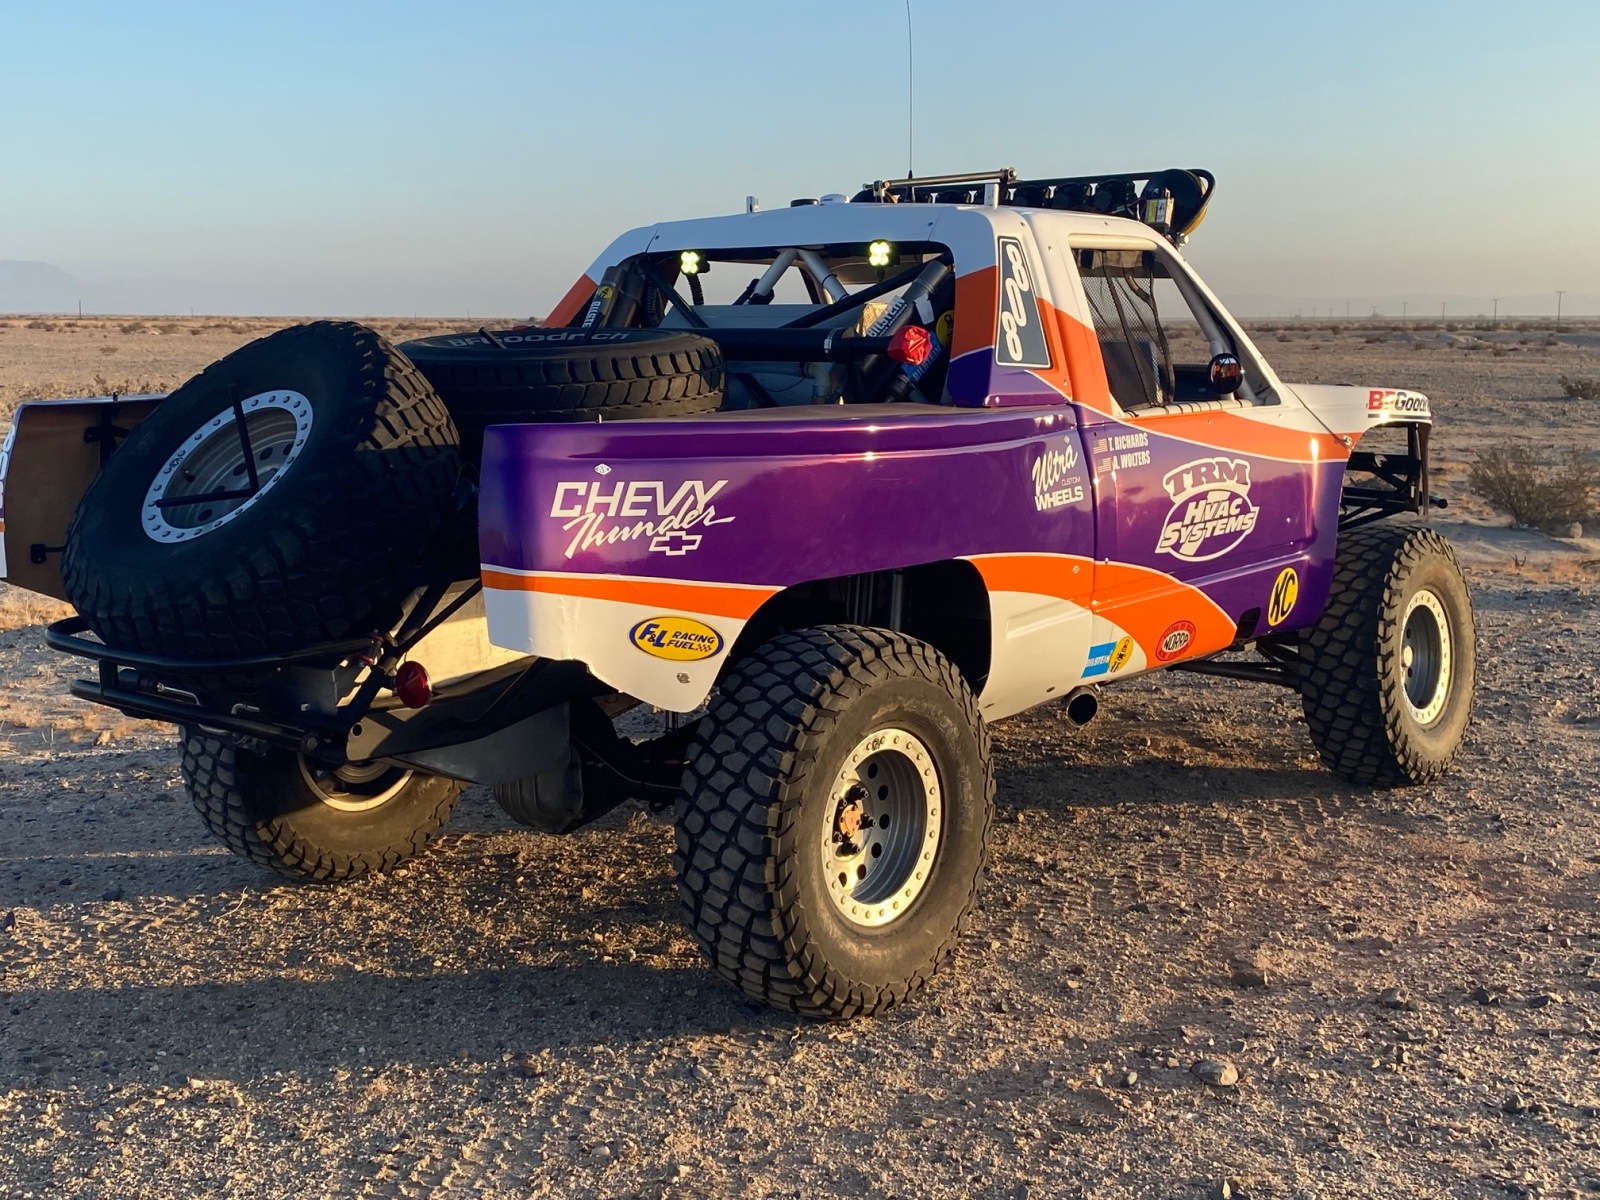 For Sale: Chevy Class 8 ex White Lightning Restored ready for NORRA - photo2